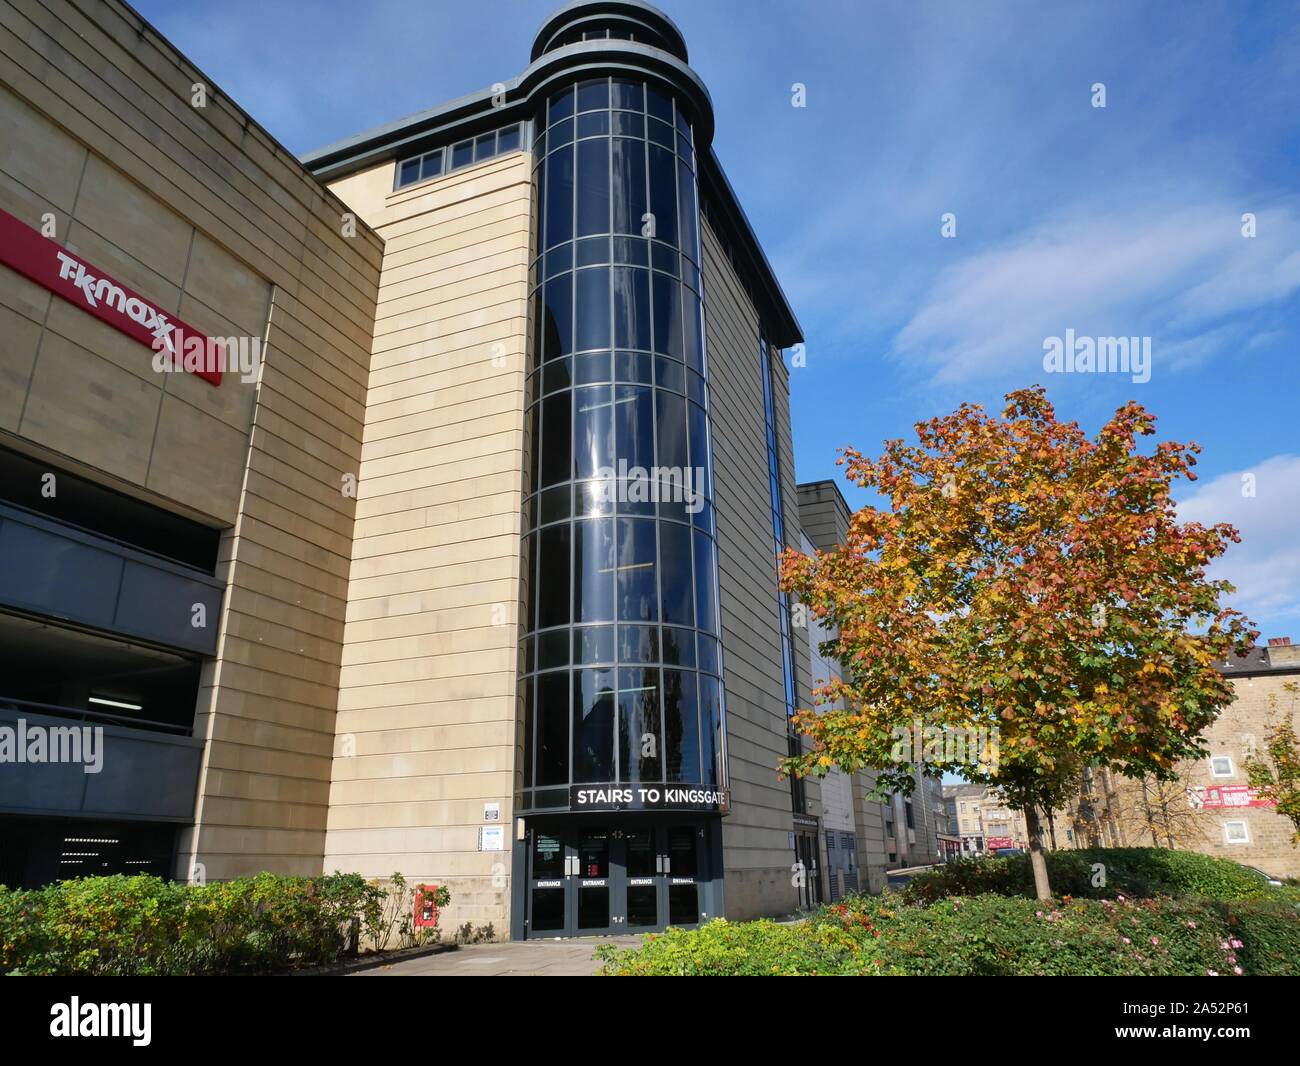 The rear entrance to kingsgate shopping centre with dark glass atrium staircase leeding to parking and shops in Huddersfield off the lower ringroad Stock Photo